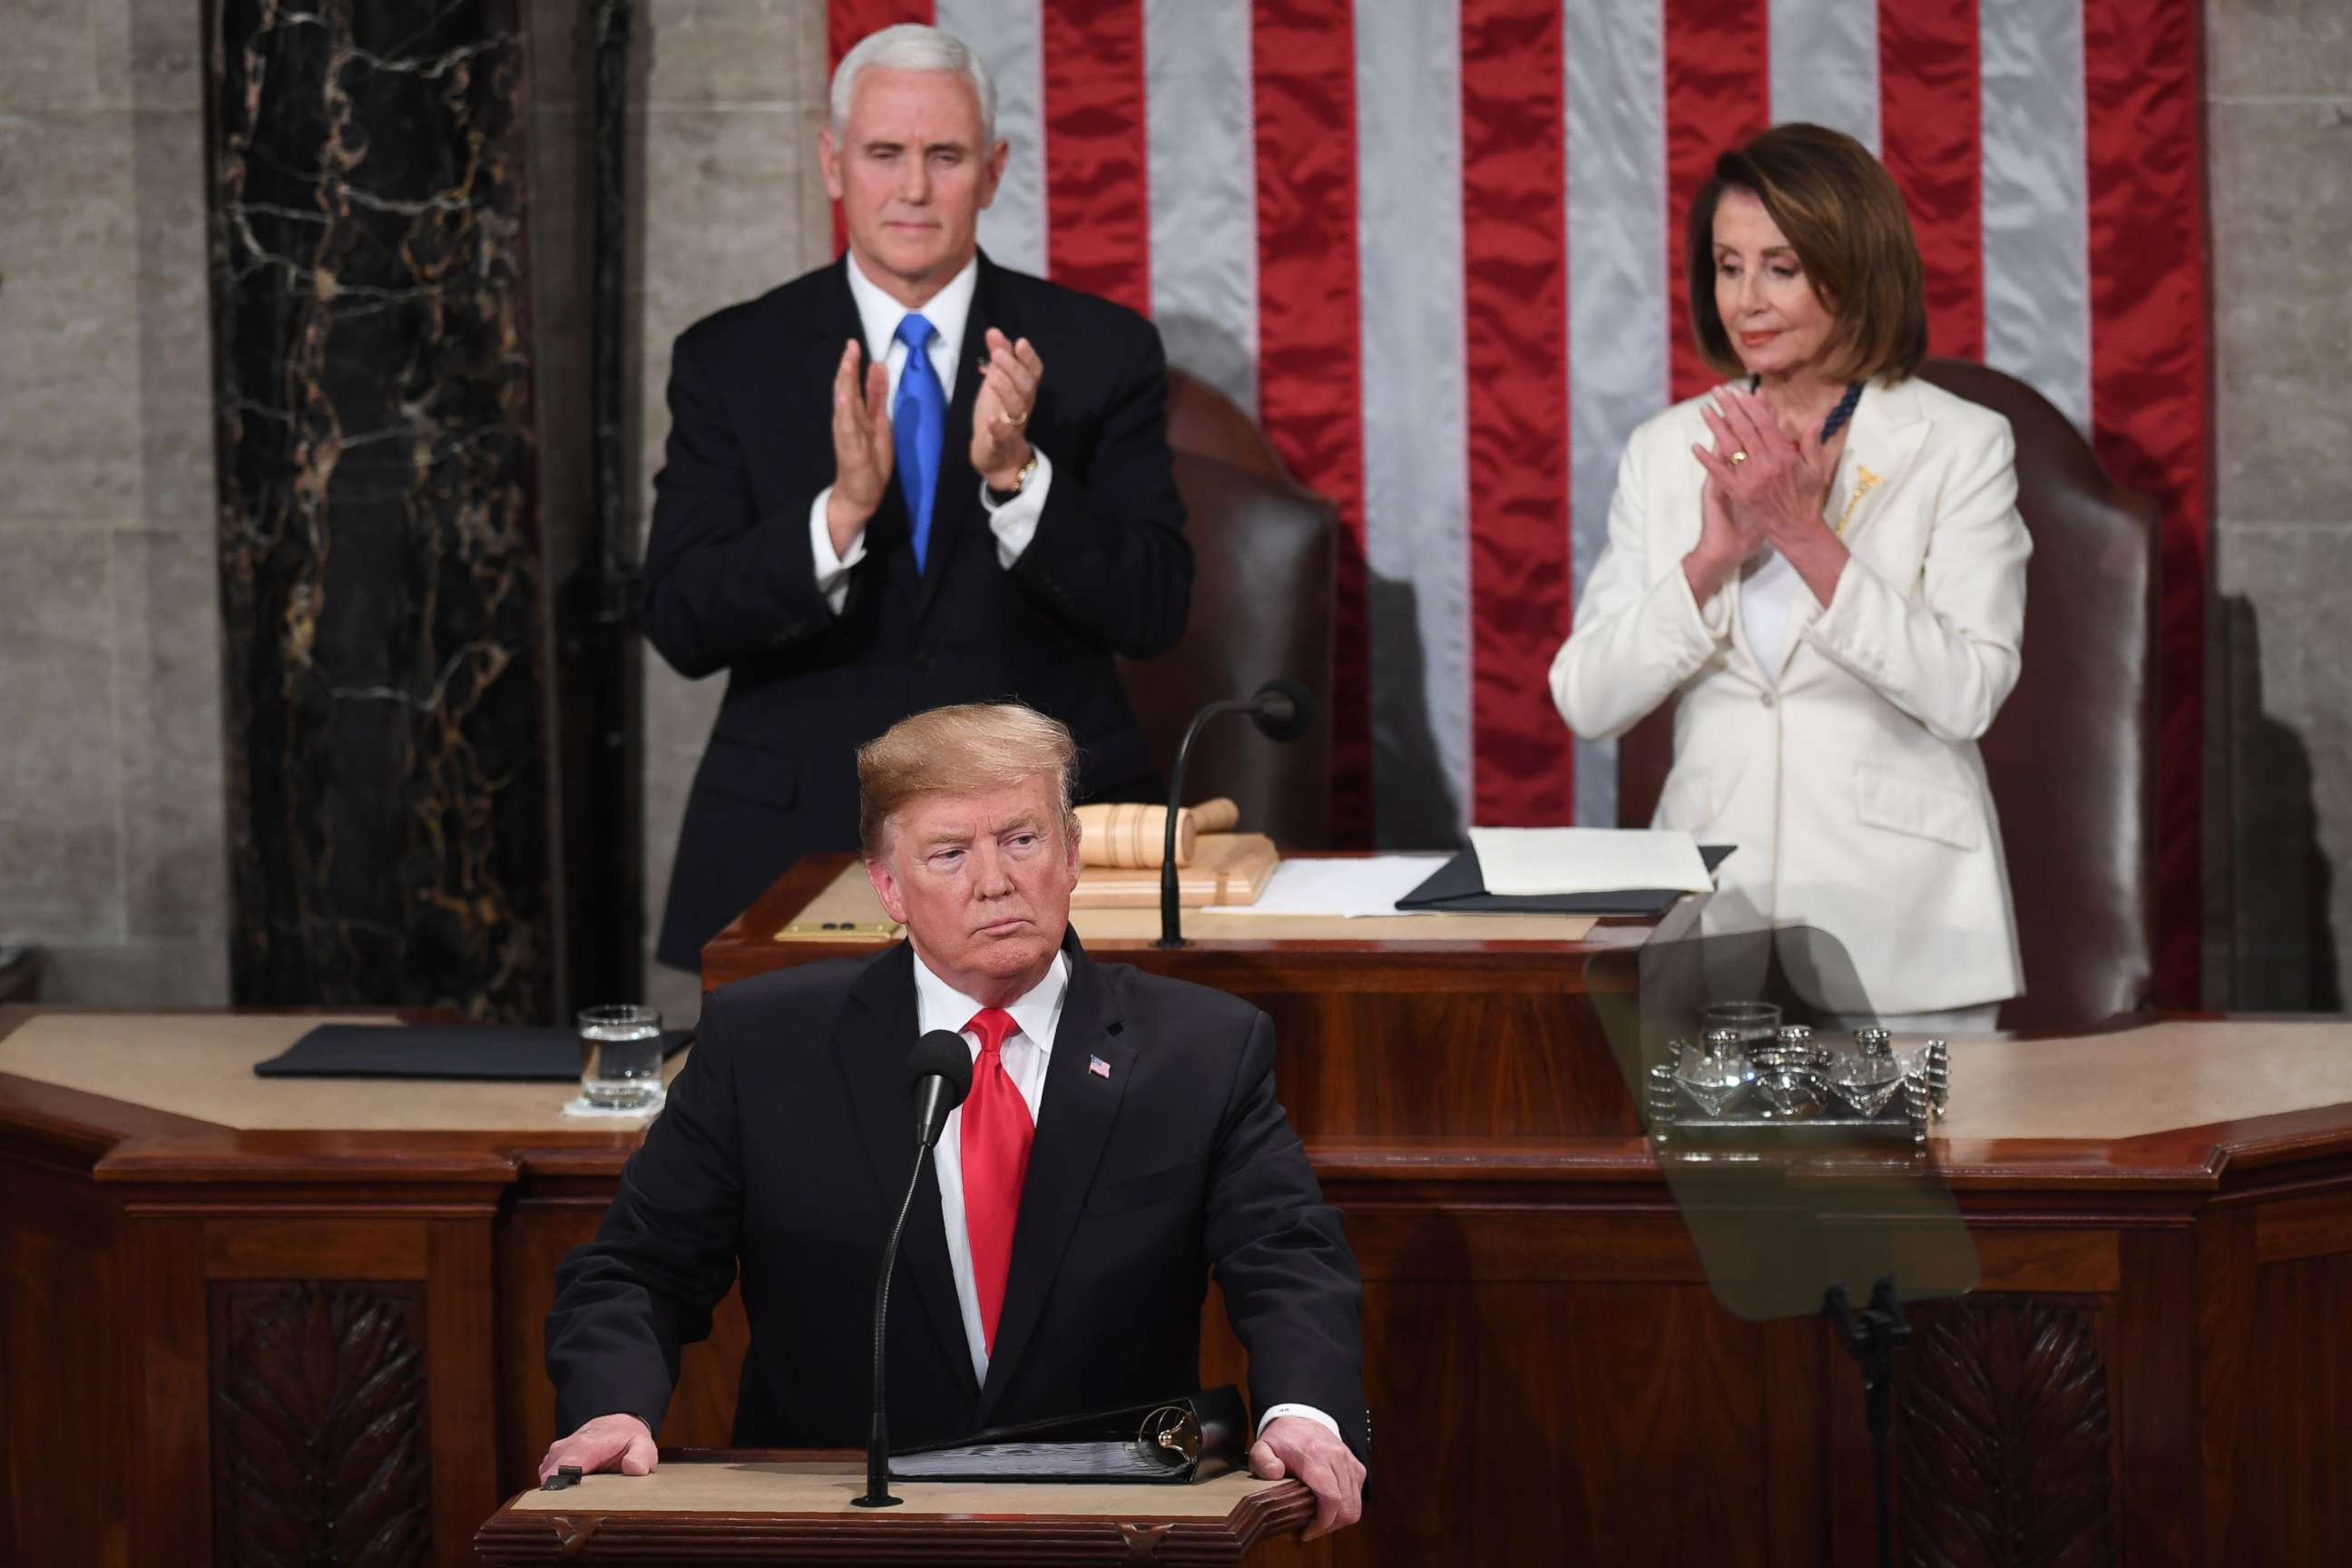 PHOTO: President Donald Trump, flanked by speaker of the U.S. House of Representatives Nancy Pelosi and Vice President Mike Pence, takes the podium to deliver the State of the Union address in Washington, Feb. 5, 2019.